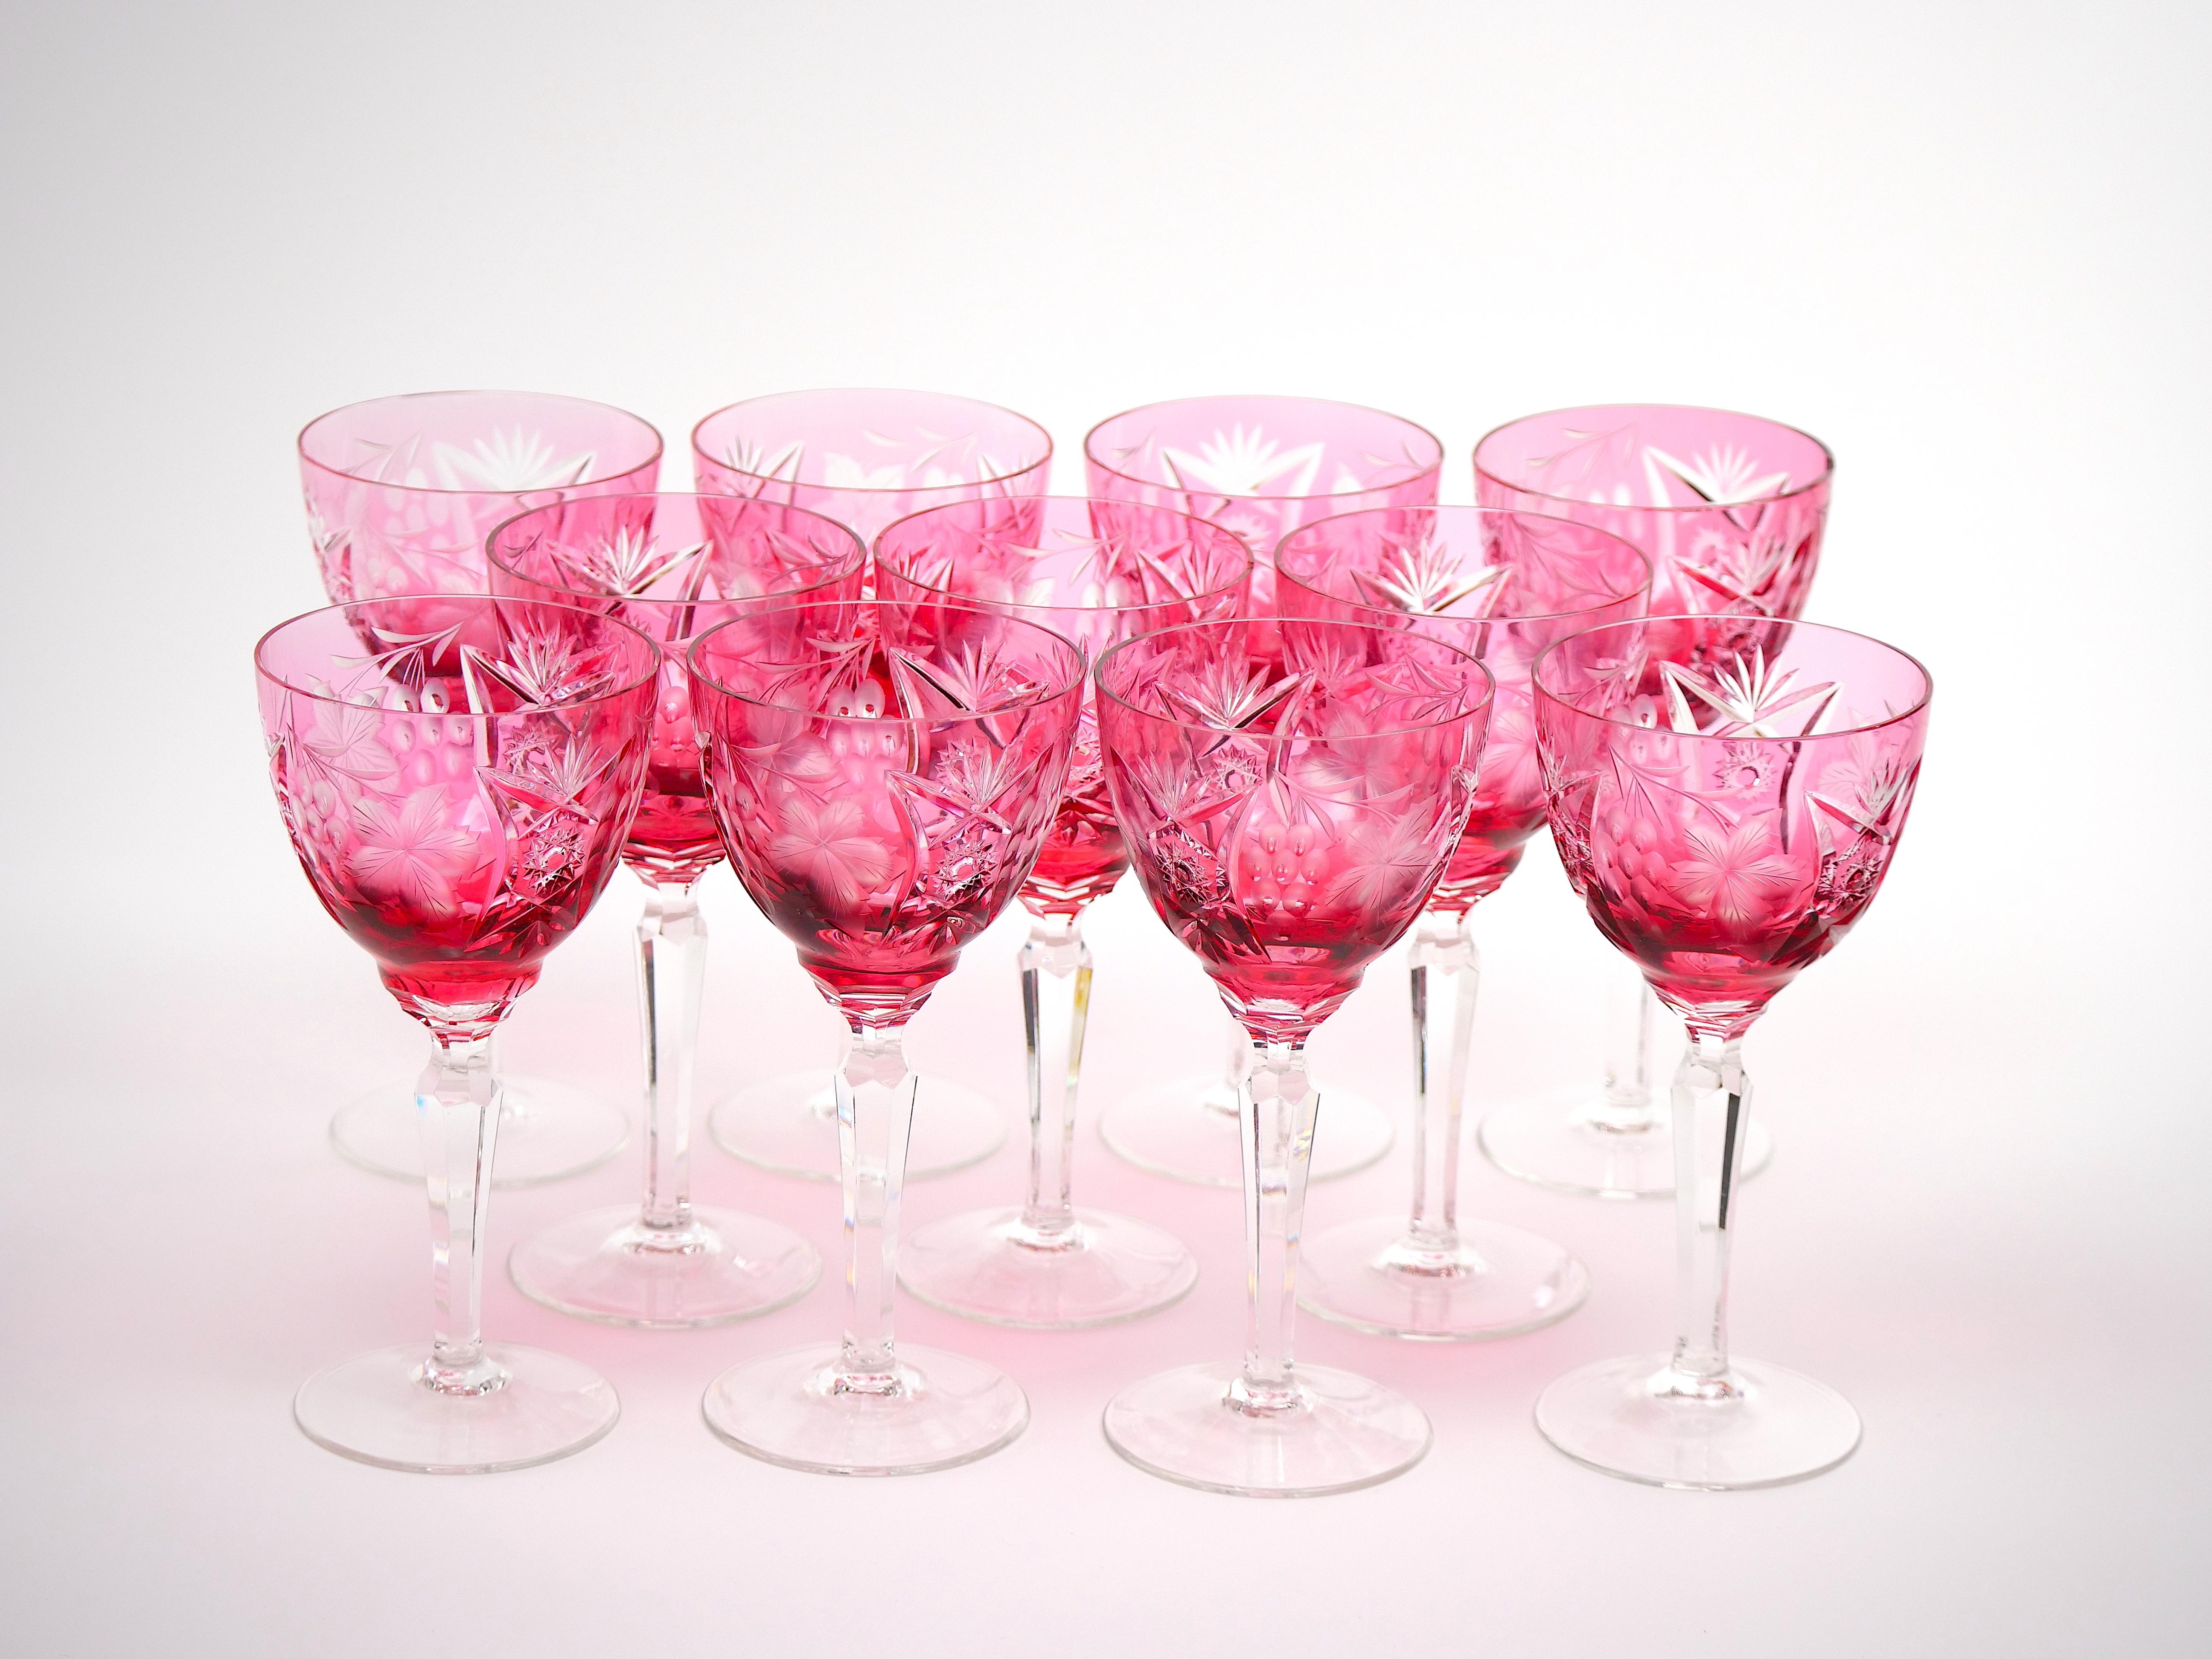 Enhance your elegant soirees with our exquisite Val-Saint-Lambert hand etched tableware or barware crystal tall wine or water glassware service for 10 people. Crafted with the utmost precision and artistry, each champagne coupe is meticulously